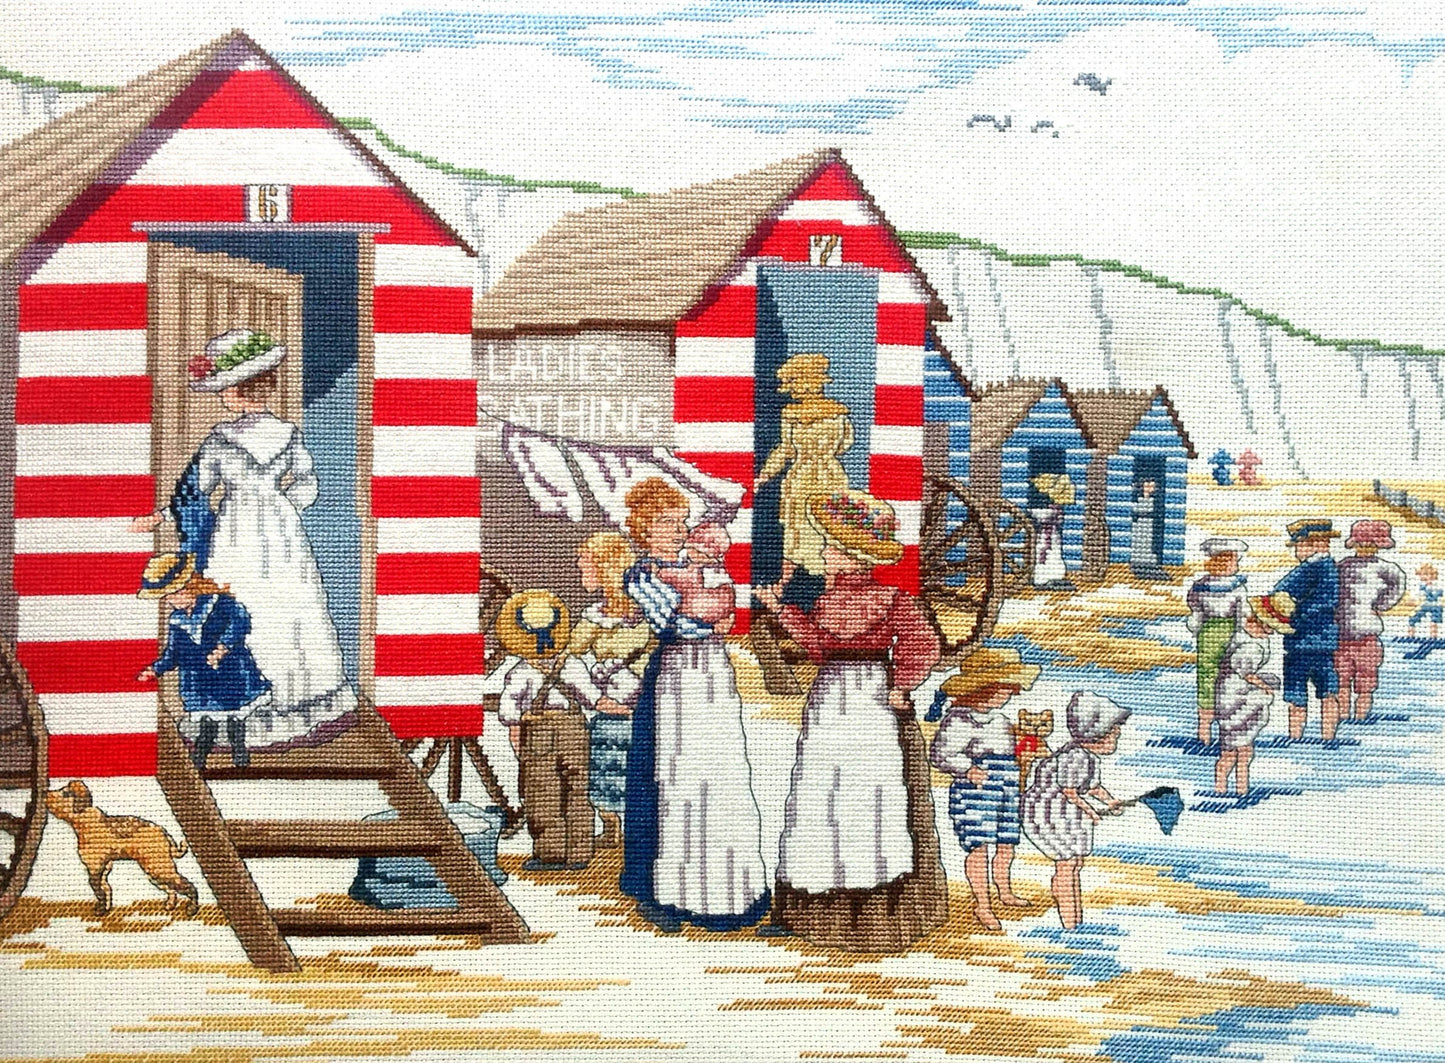 Ladies Bathing Huts All Our Yesterdays Cross Stitch Kit by Faye Whittaker